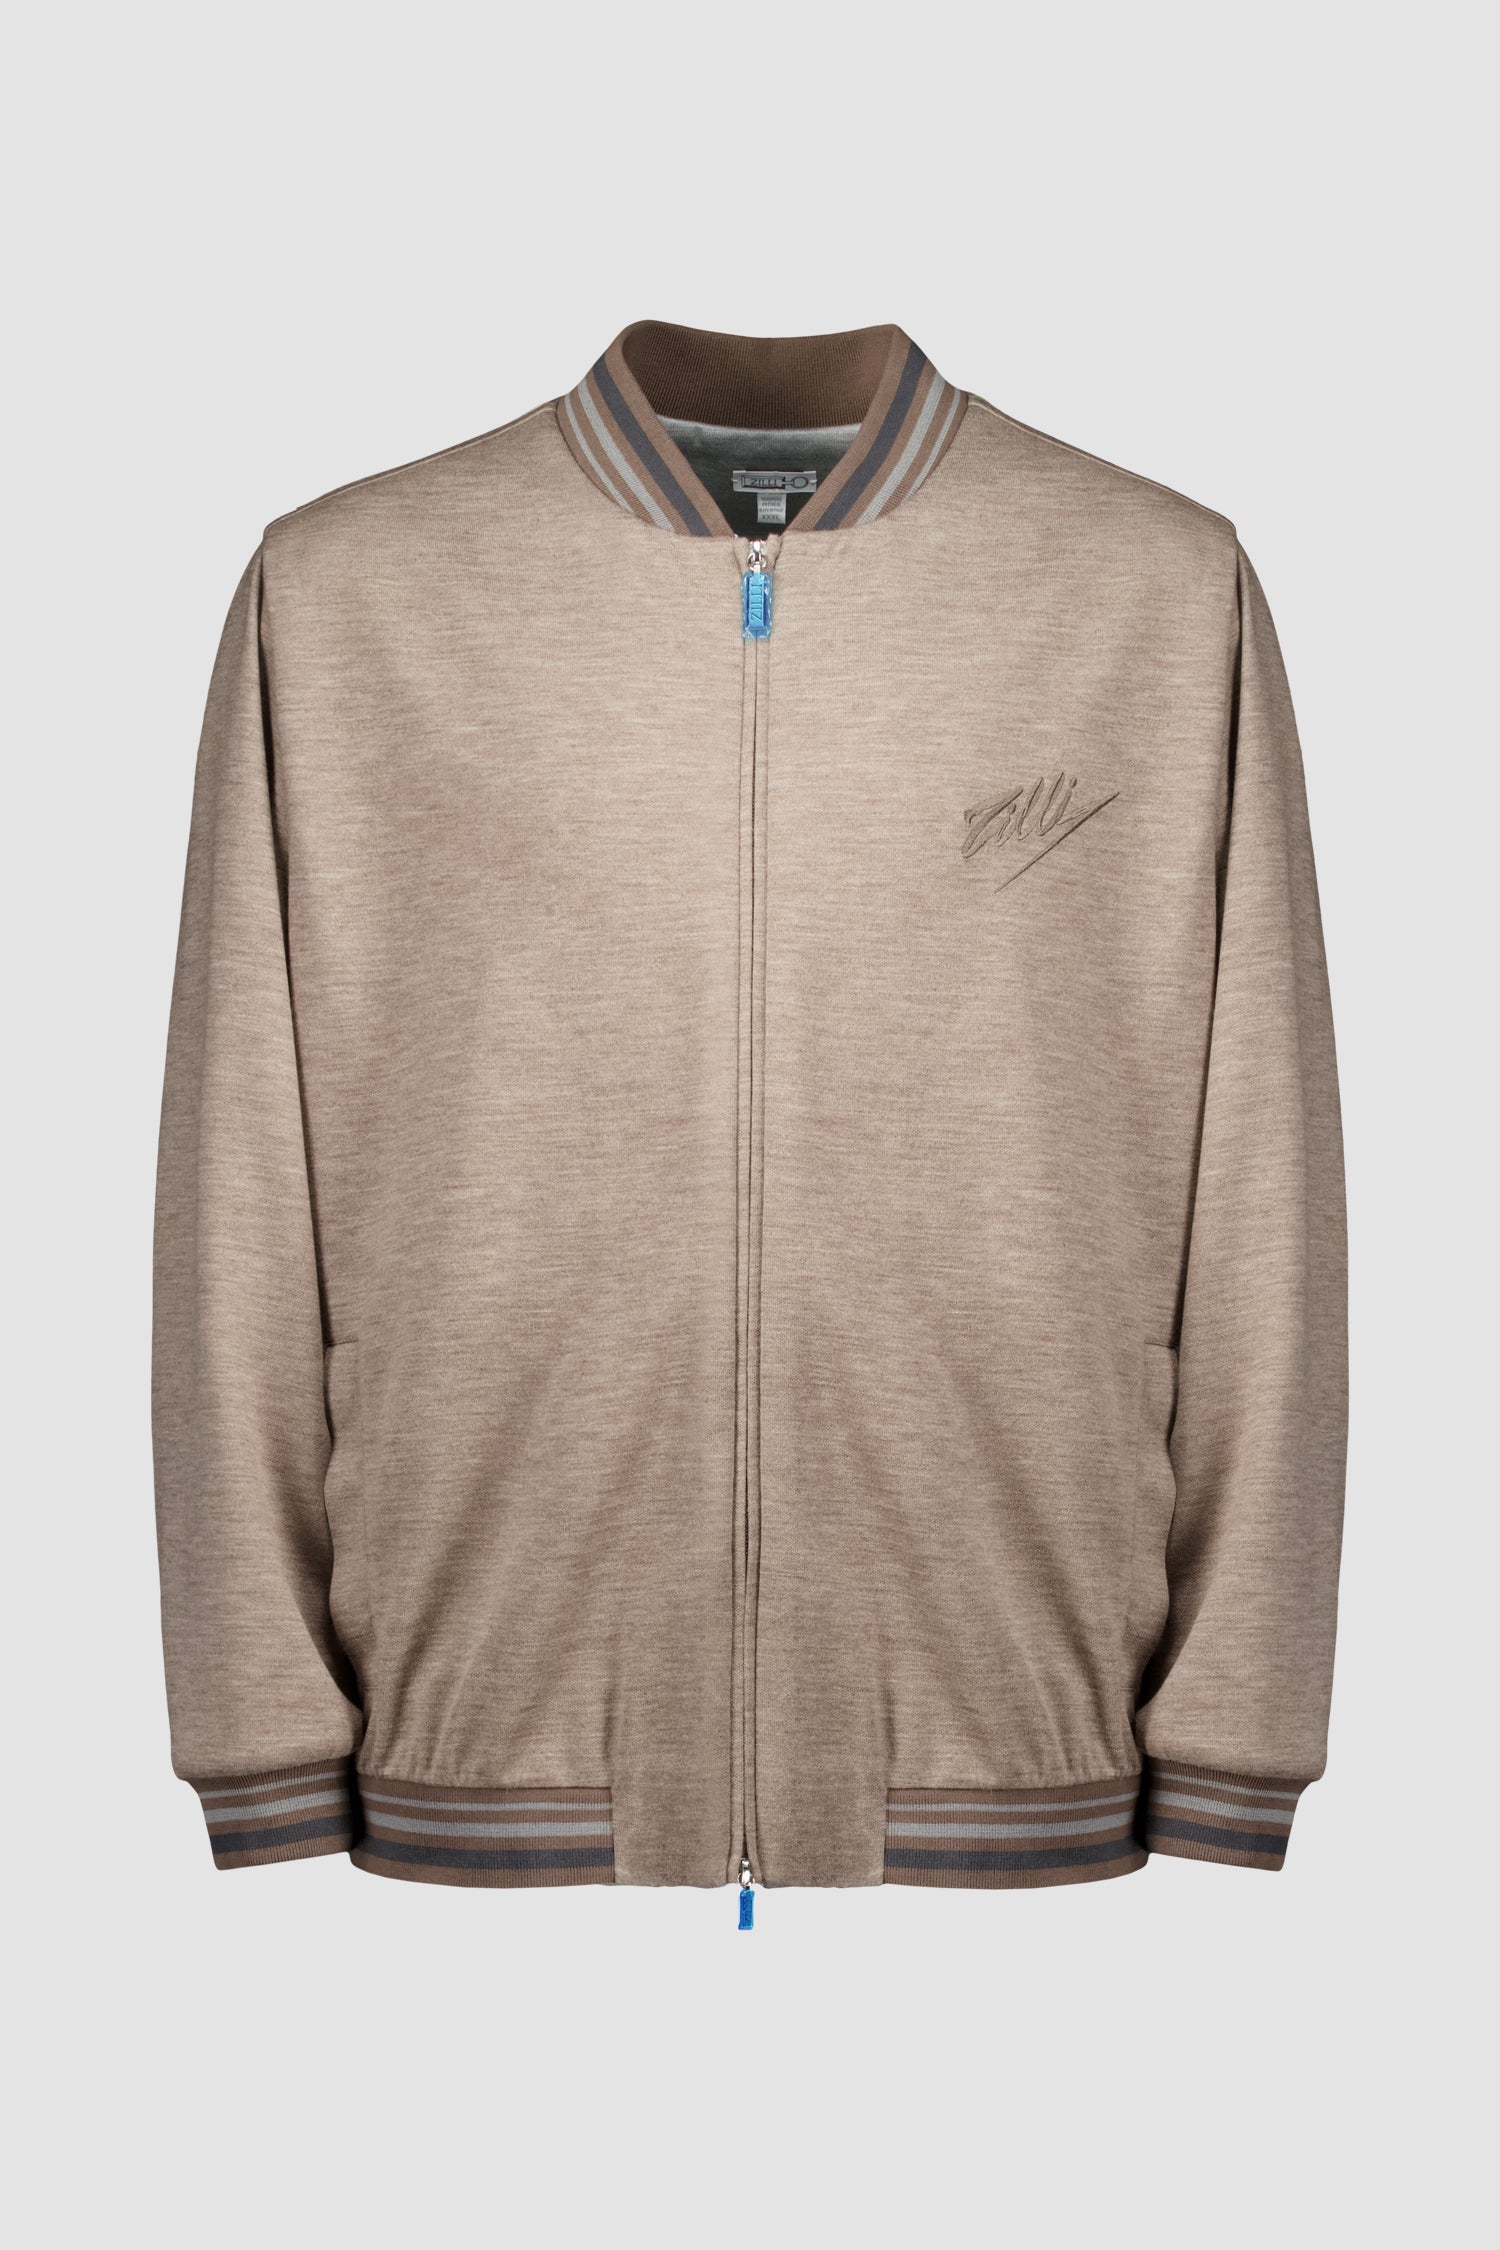 Zilli Taupe Bomber